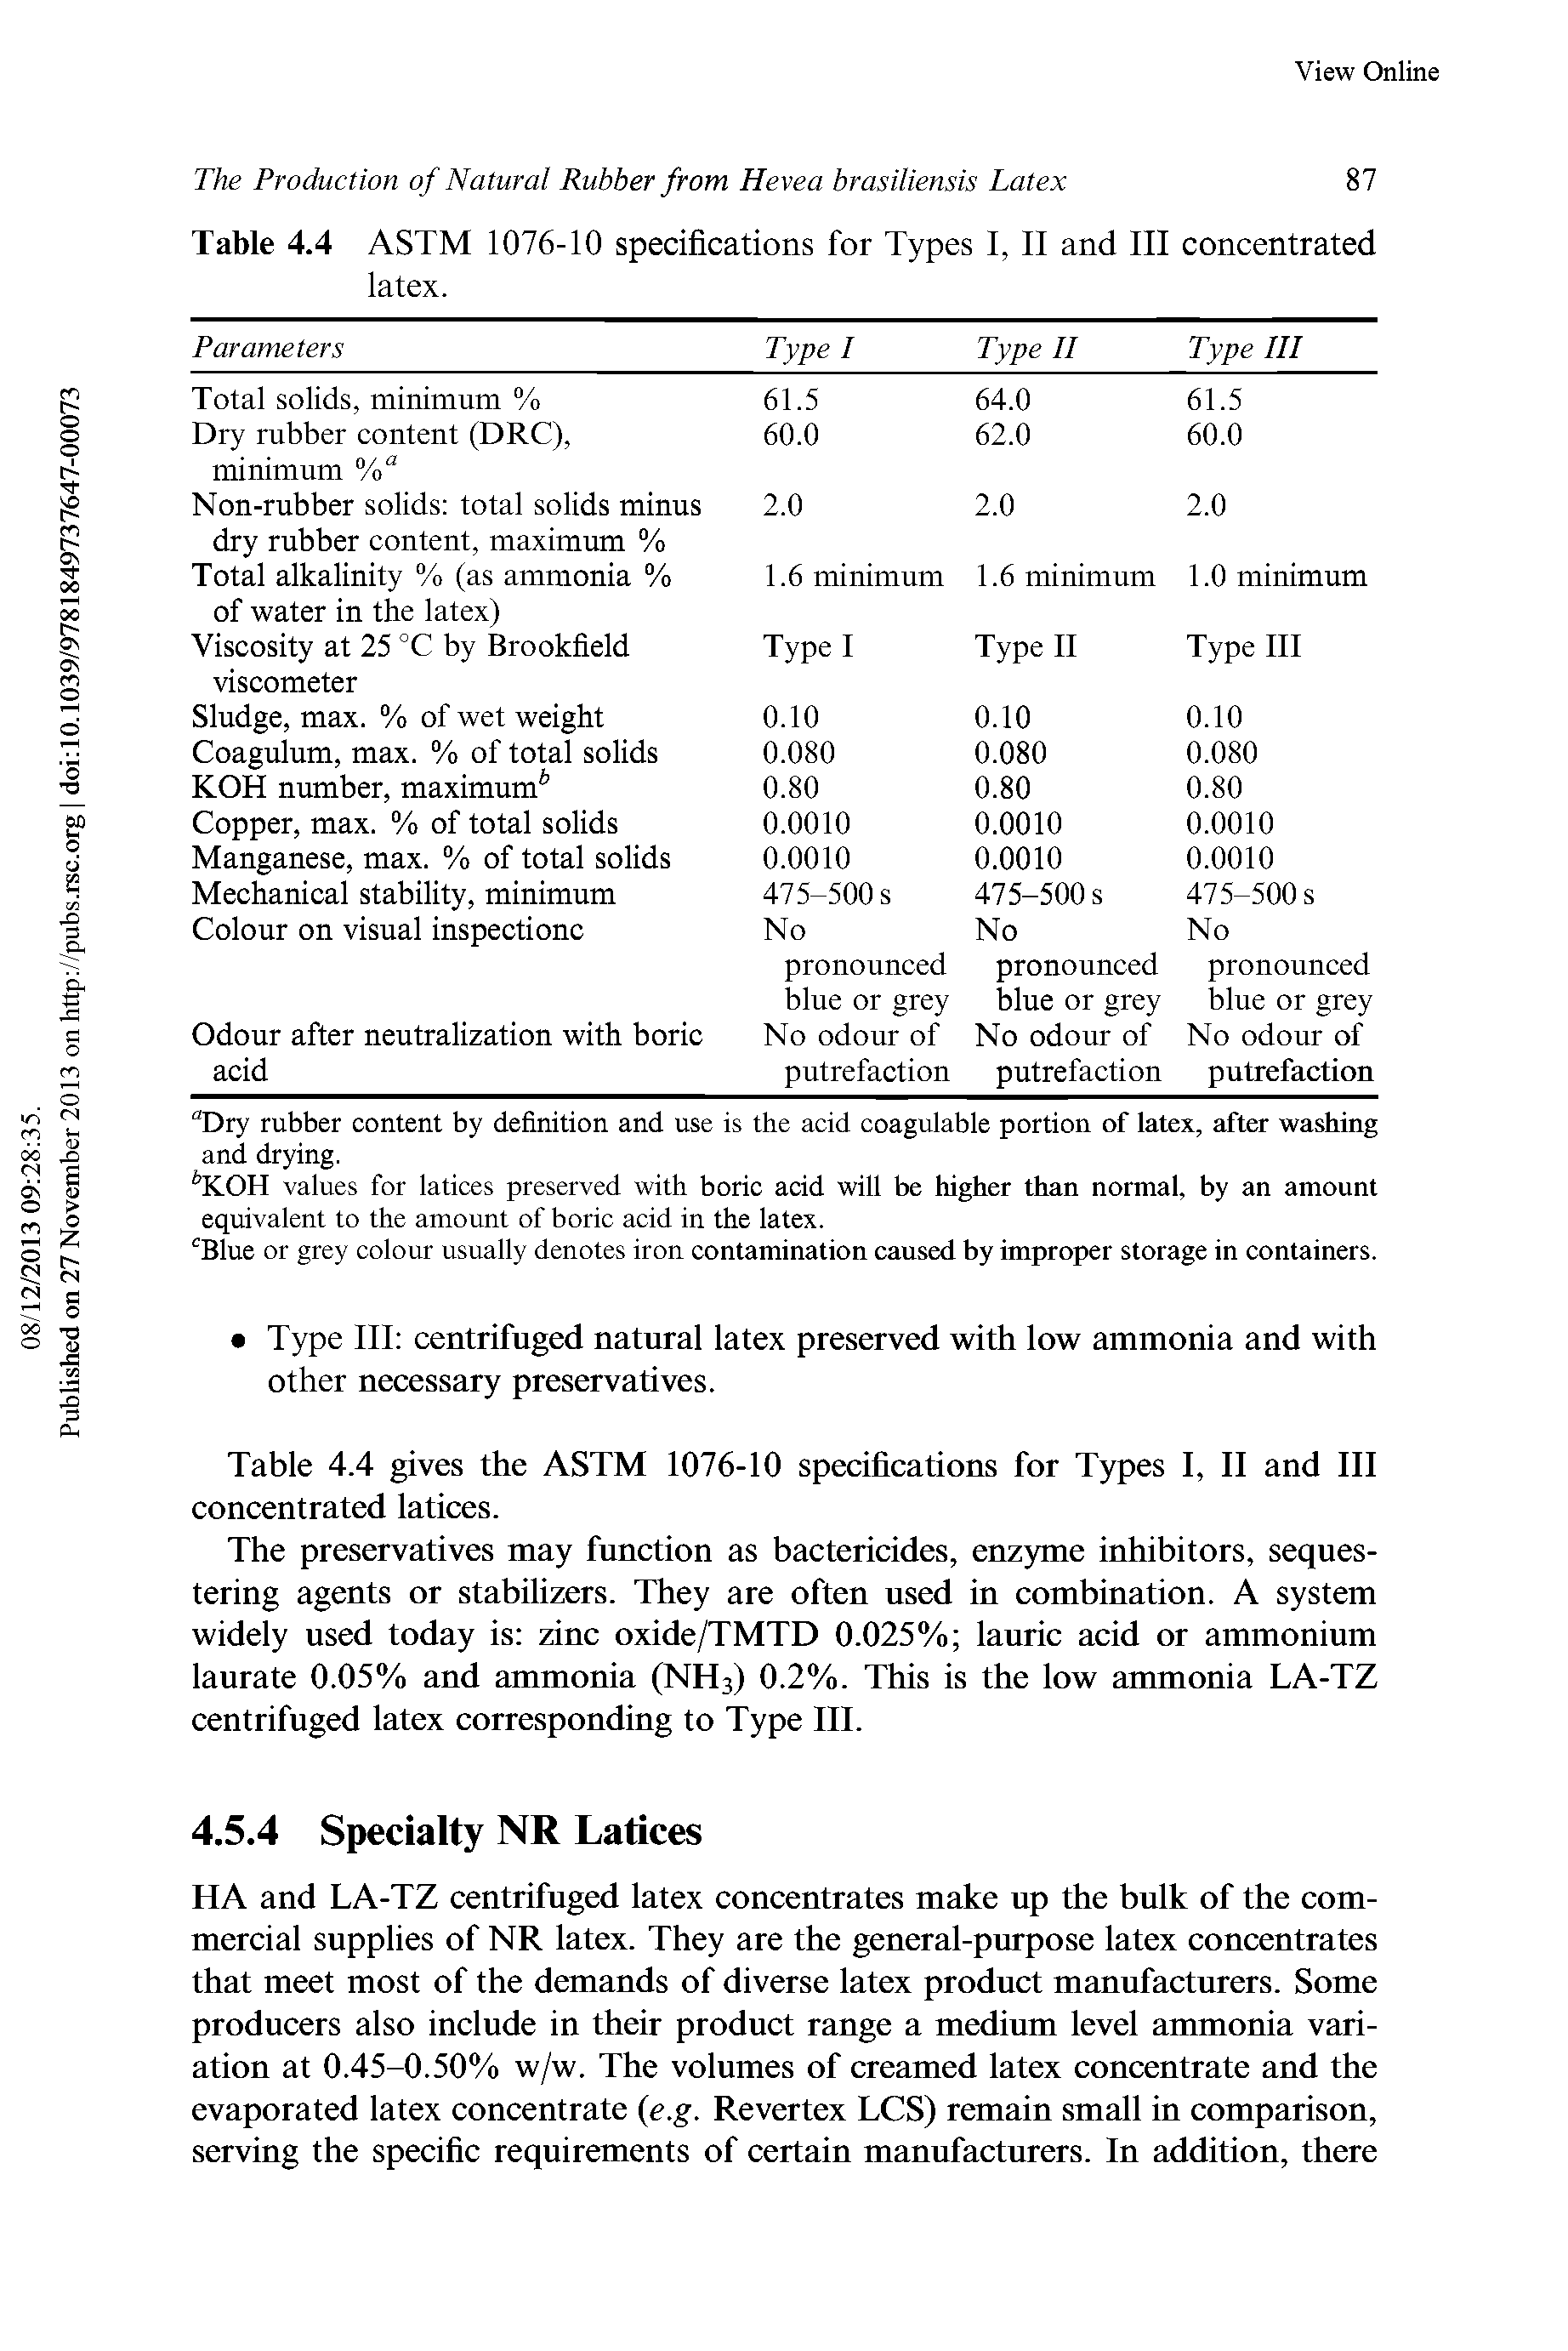 Table 4.4 ASTM 1076-10 specifications for Types I, II and III concentrated latex.